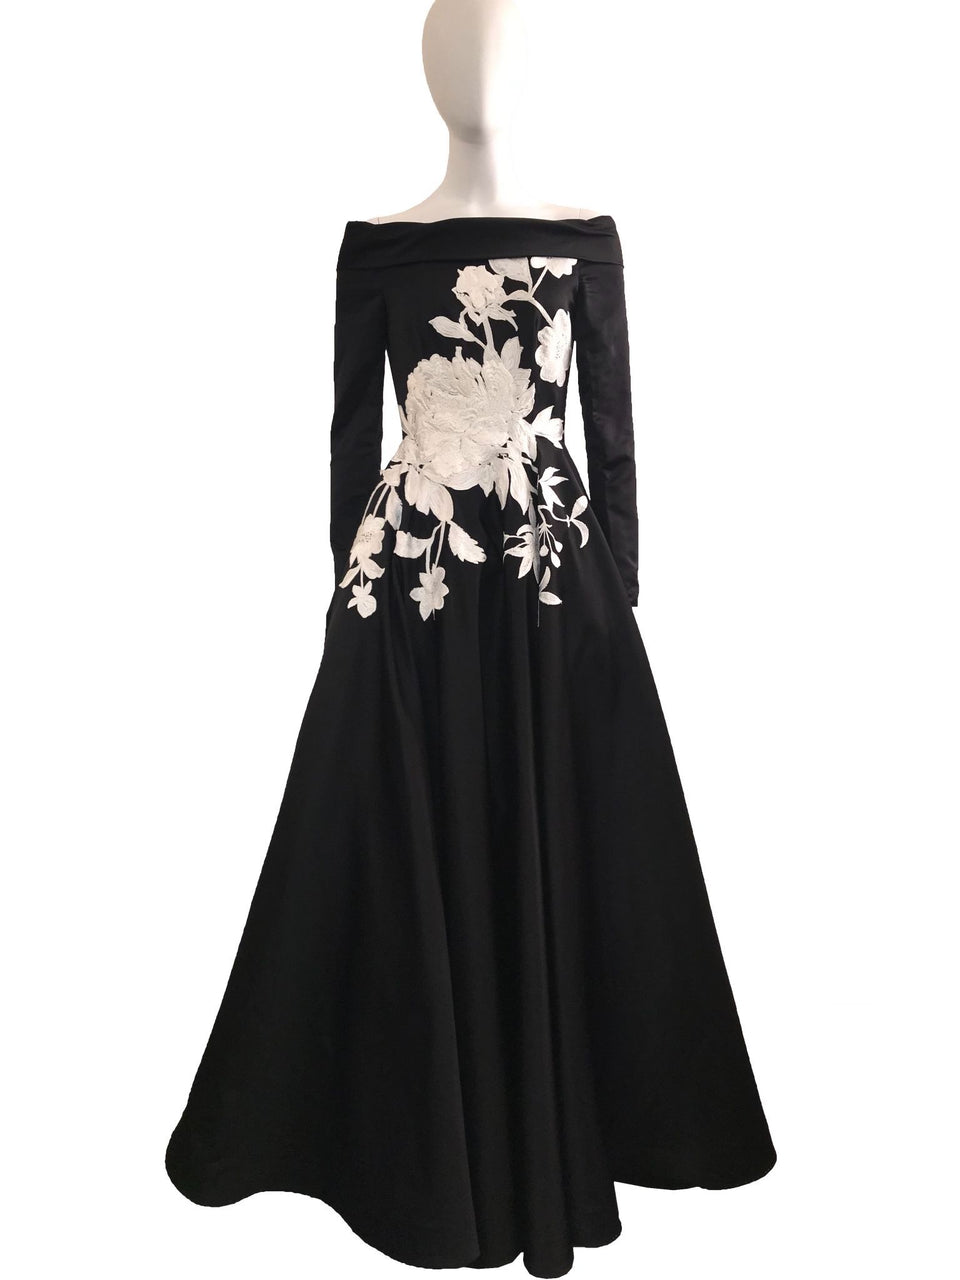 Black Long Sleeve Gown w/ White Embroidery Detail